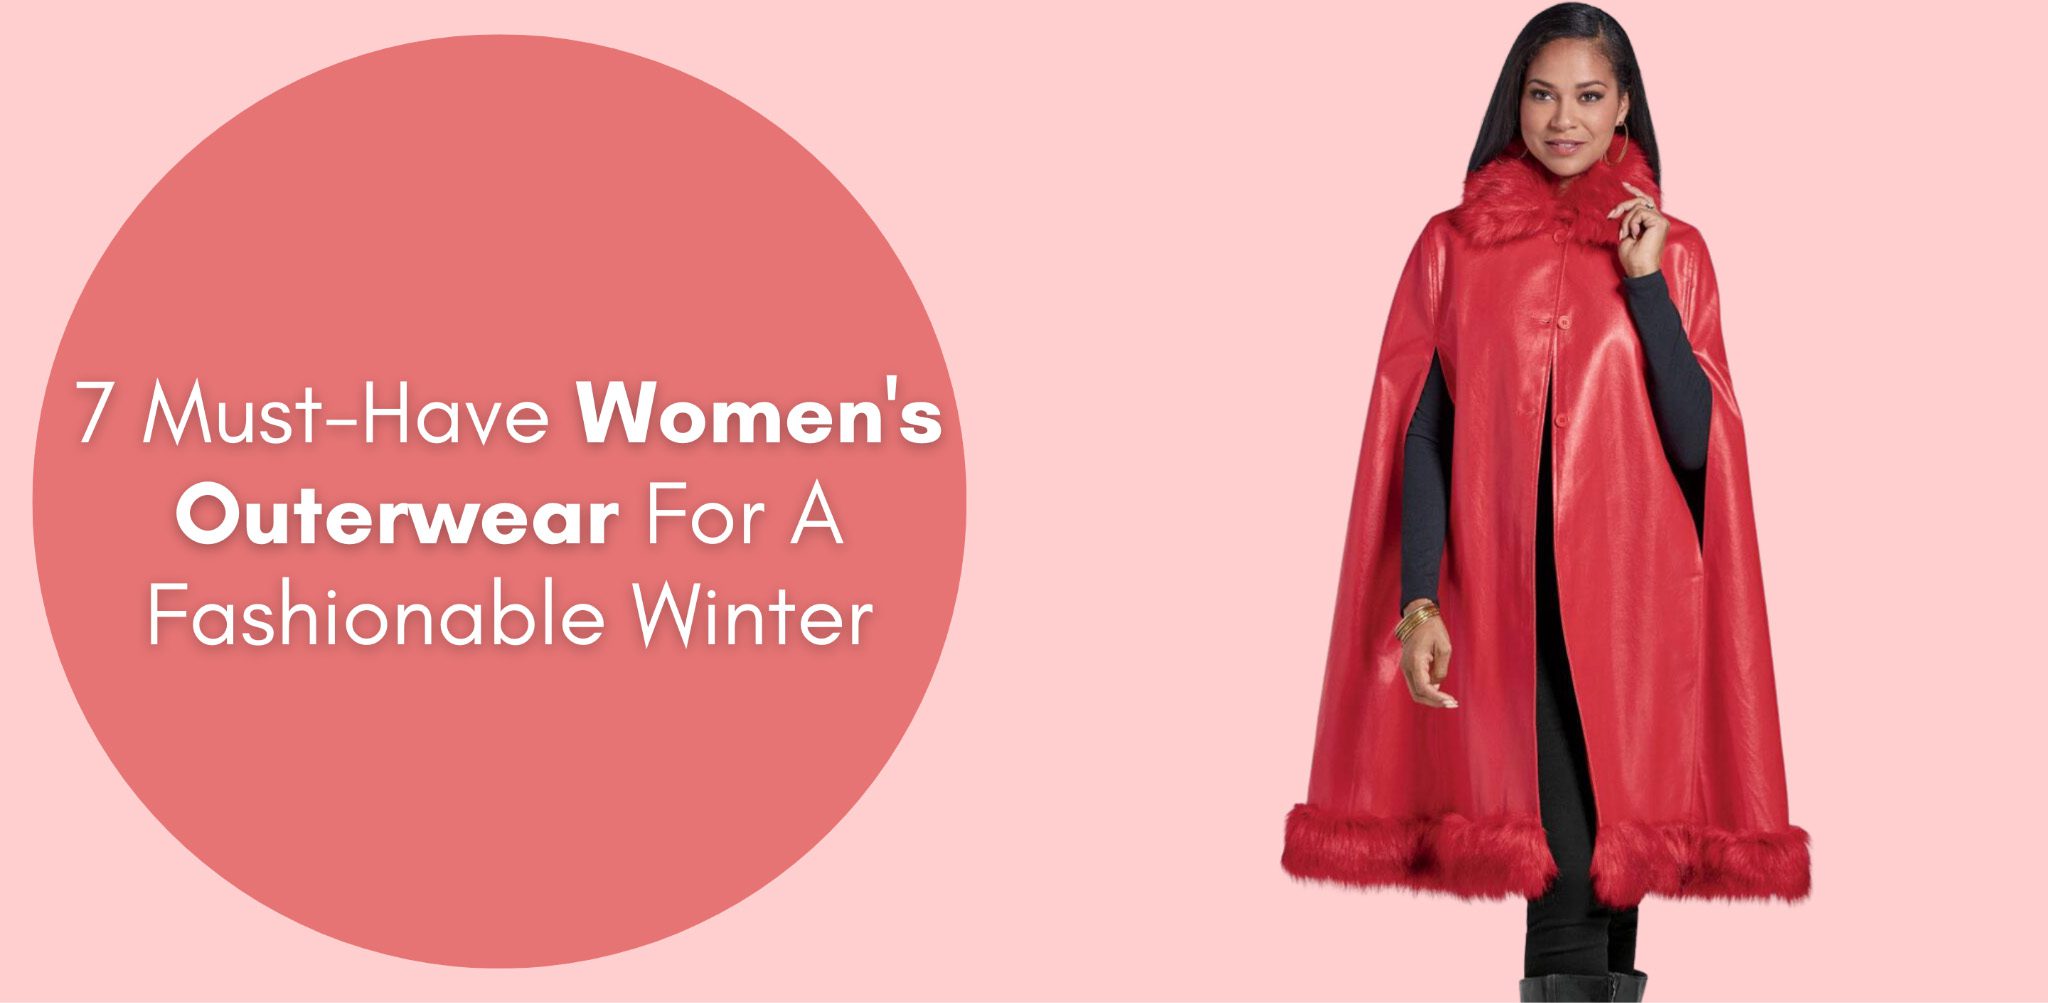 7 Must-Have Women’s Outerwear For A Fashionable Winter